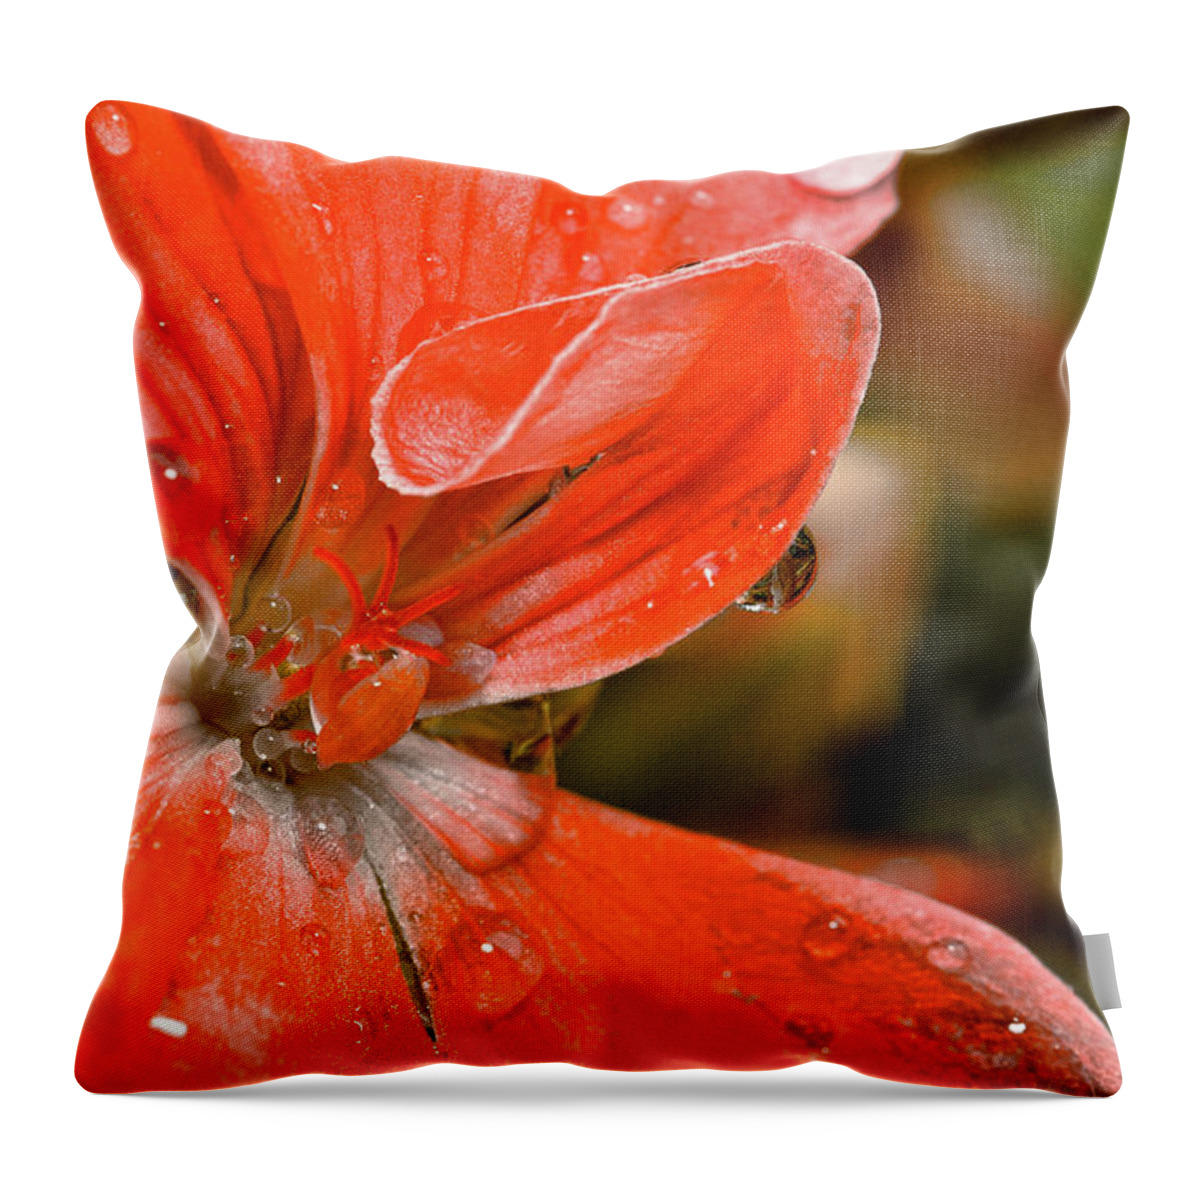 Flower Throw Pillow featuring the photograph Kissed By The Rain by Christopher Holmes